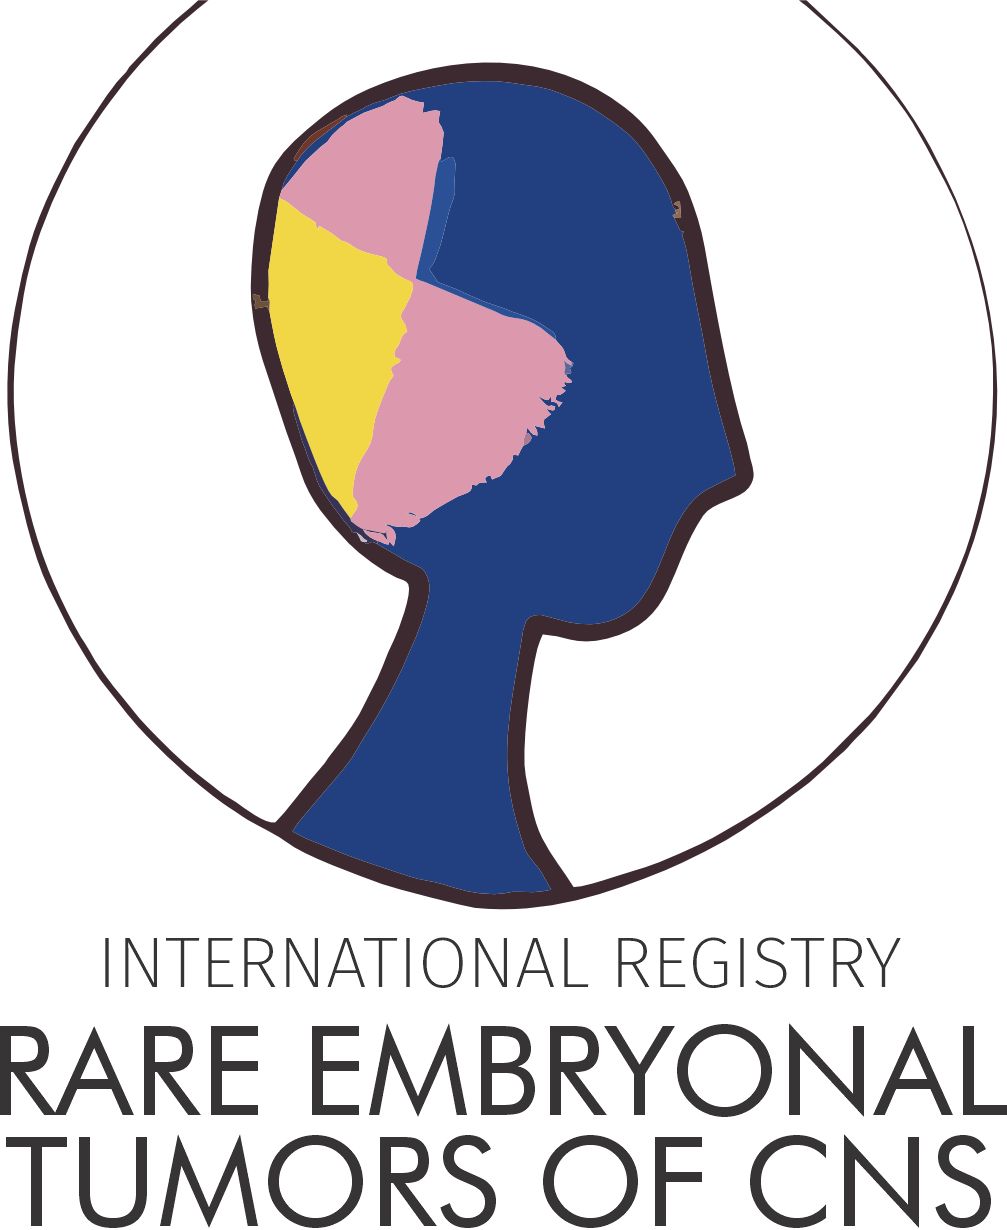 Join the International Registry of Rare Embryonal Tumors of CNS